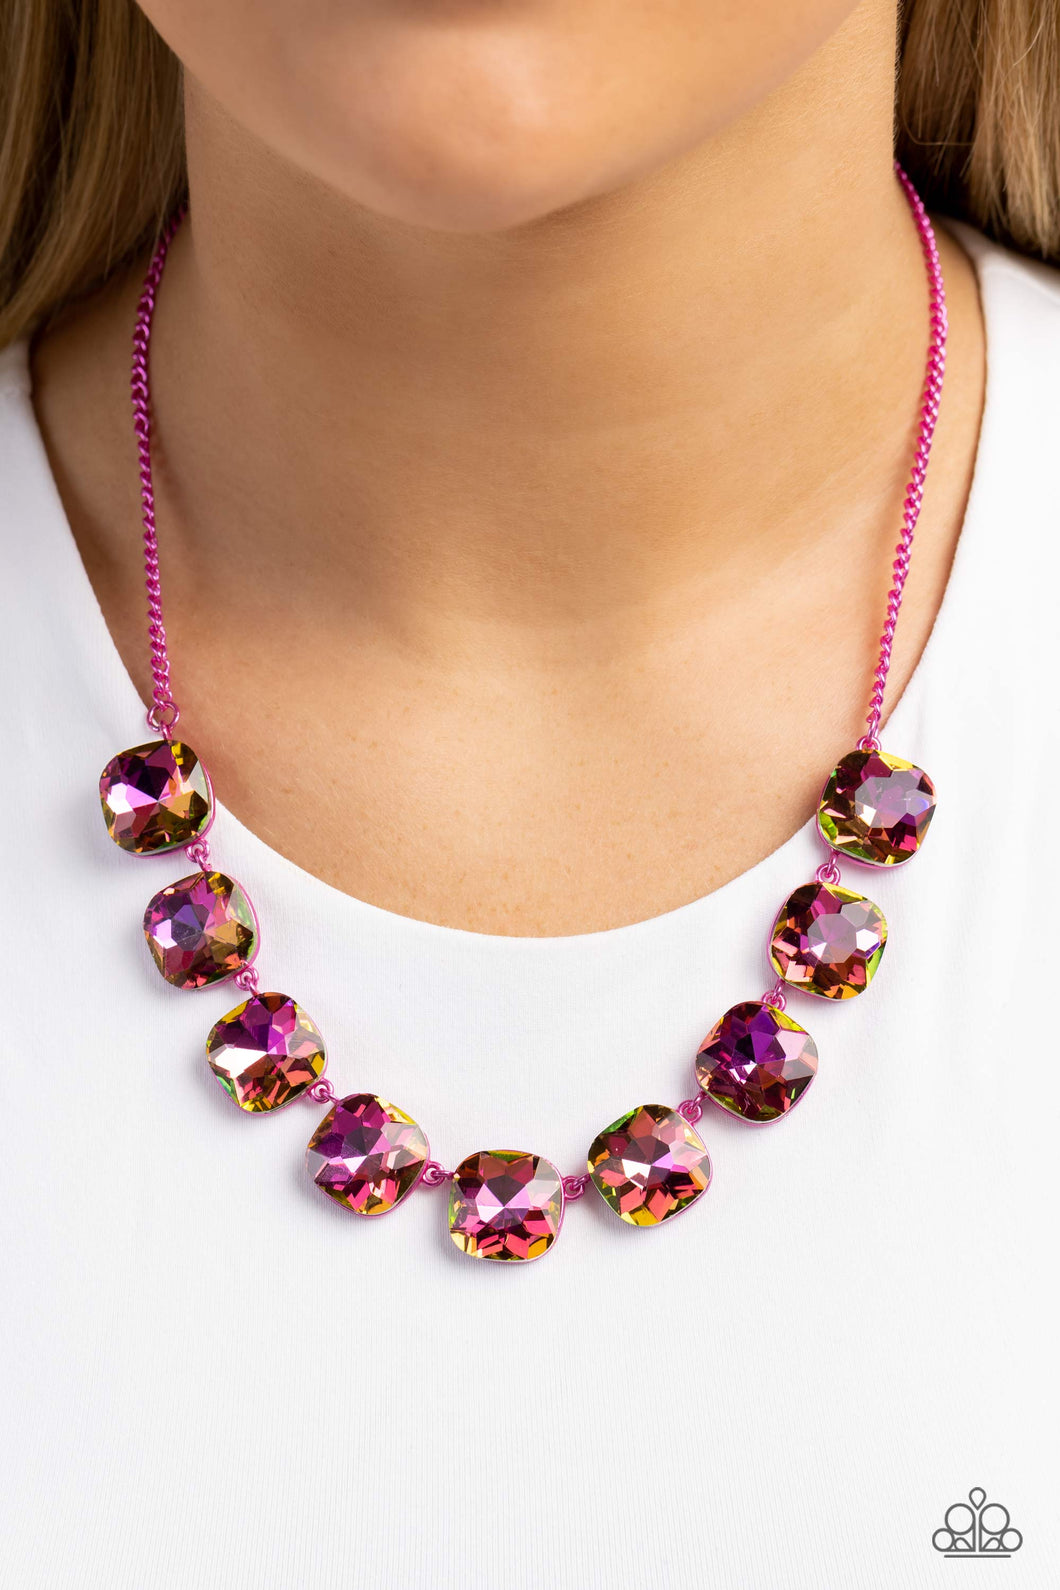 Paparazzi “Combustible Command” Pink Necklace Earring Set